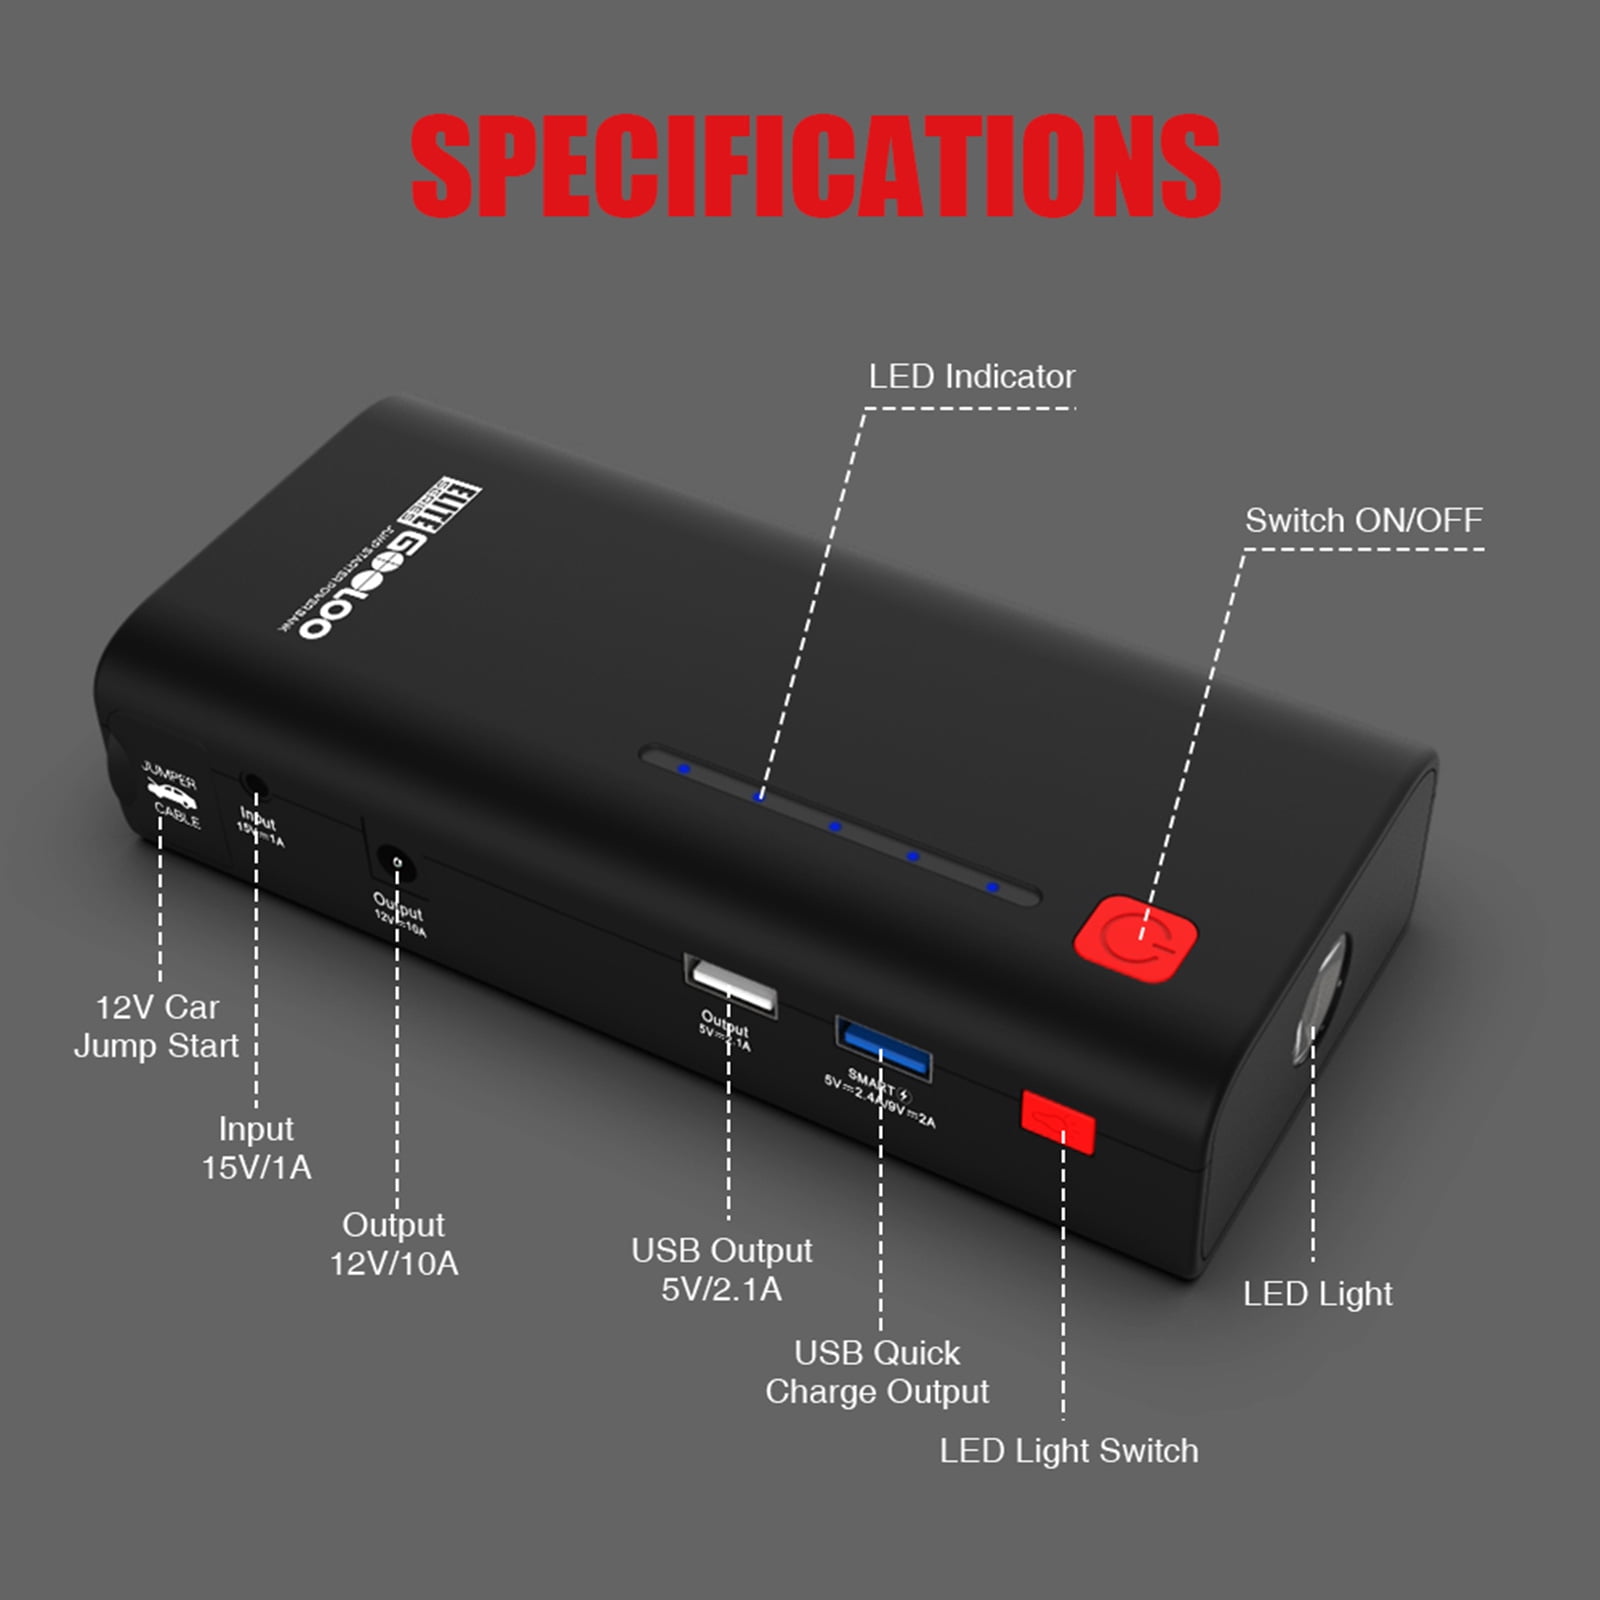 Save Up to 55% on a Portable Gooloo Jump Starter for Your Car's Emergency  Kit - CNET